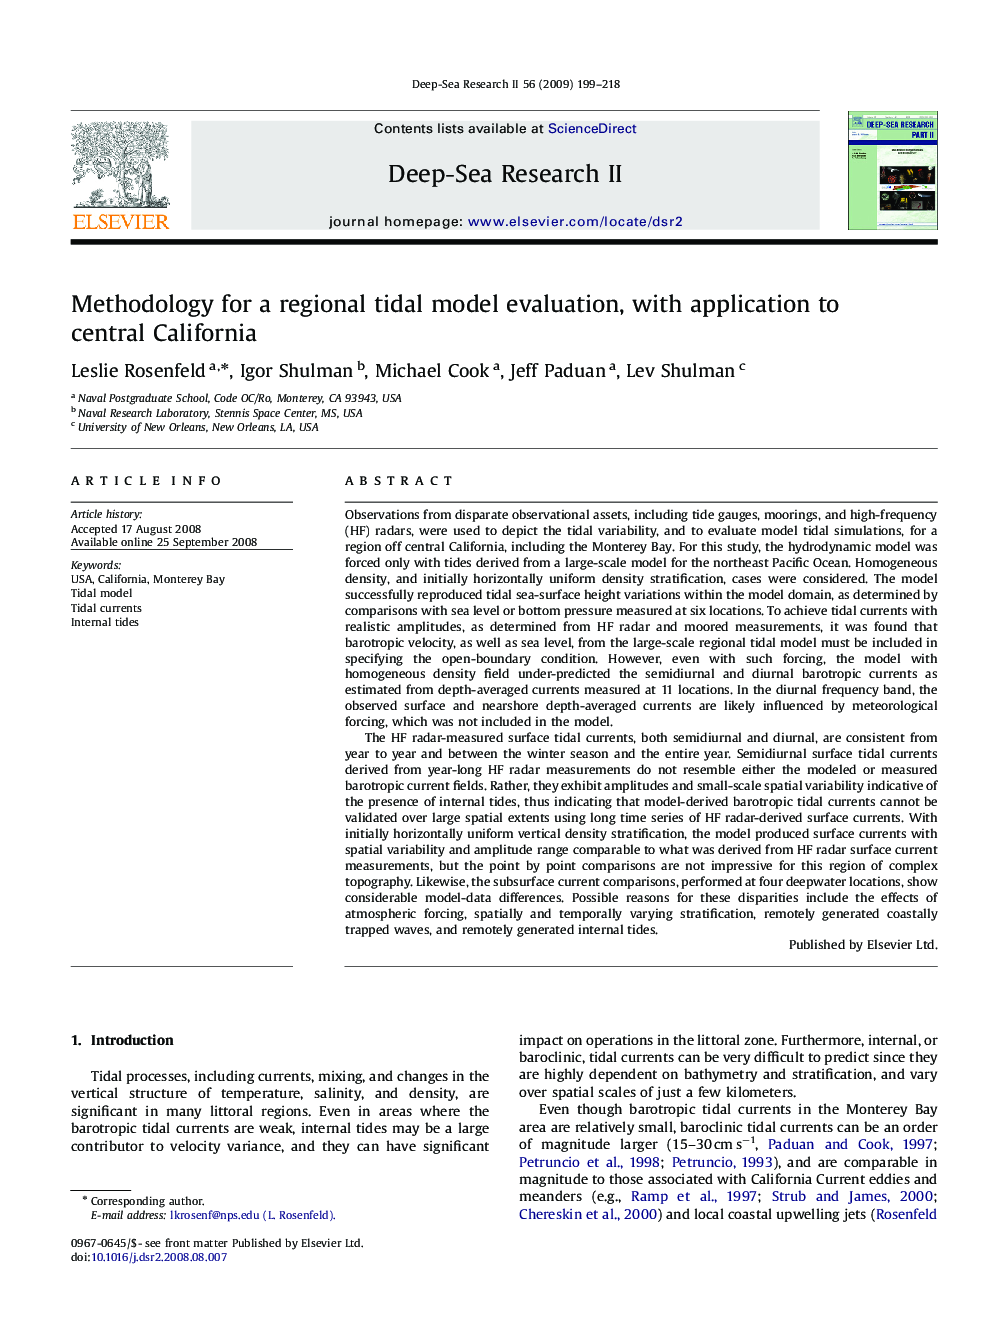 Methodology for a regional tidal model evaluation, with application to central California